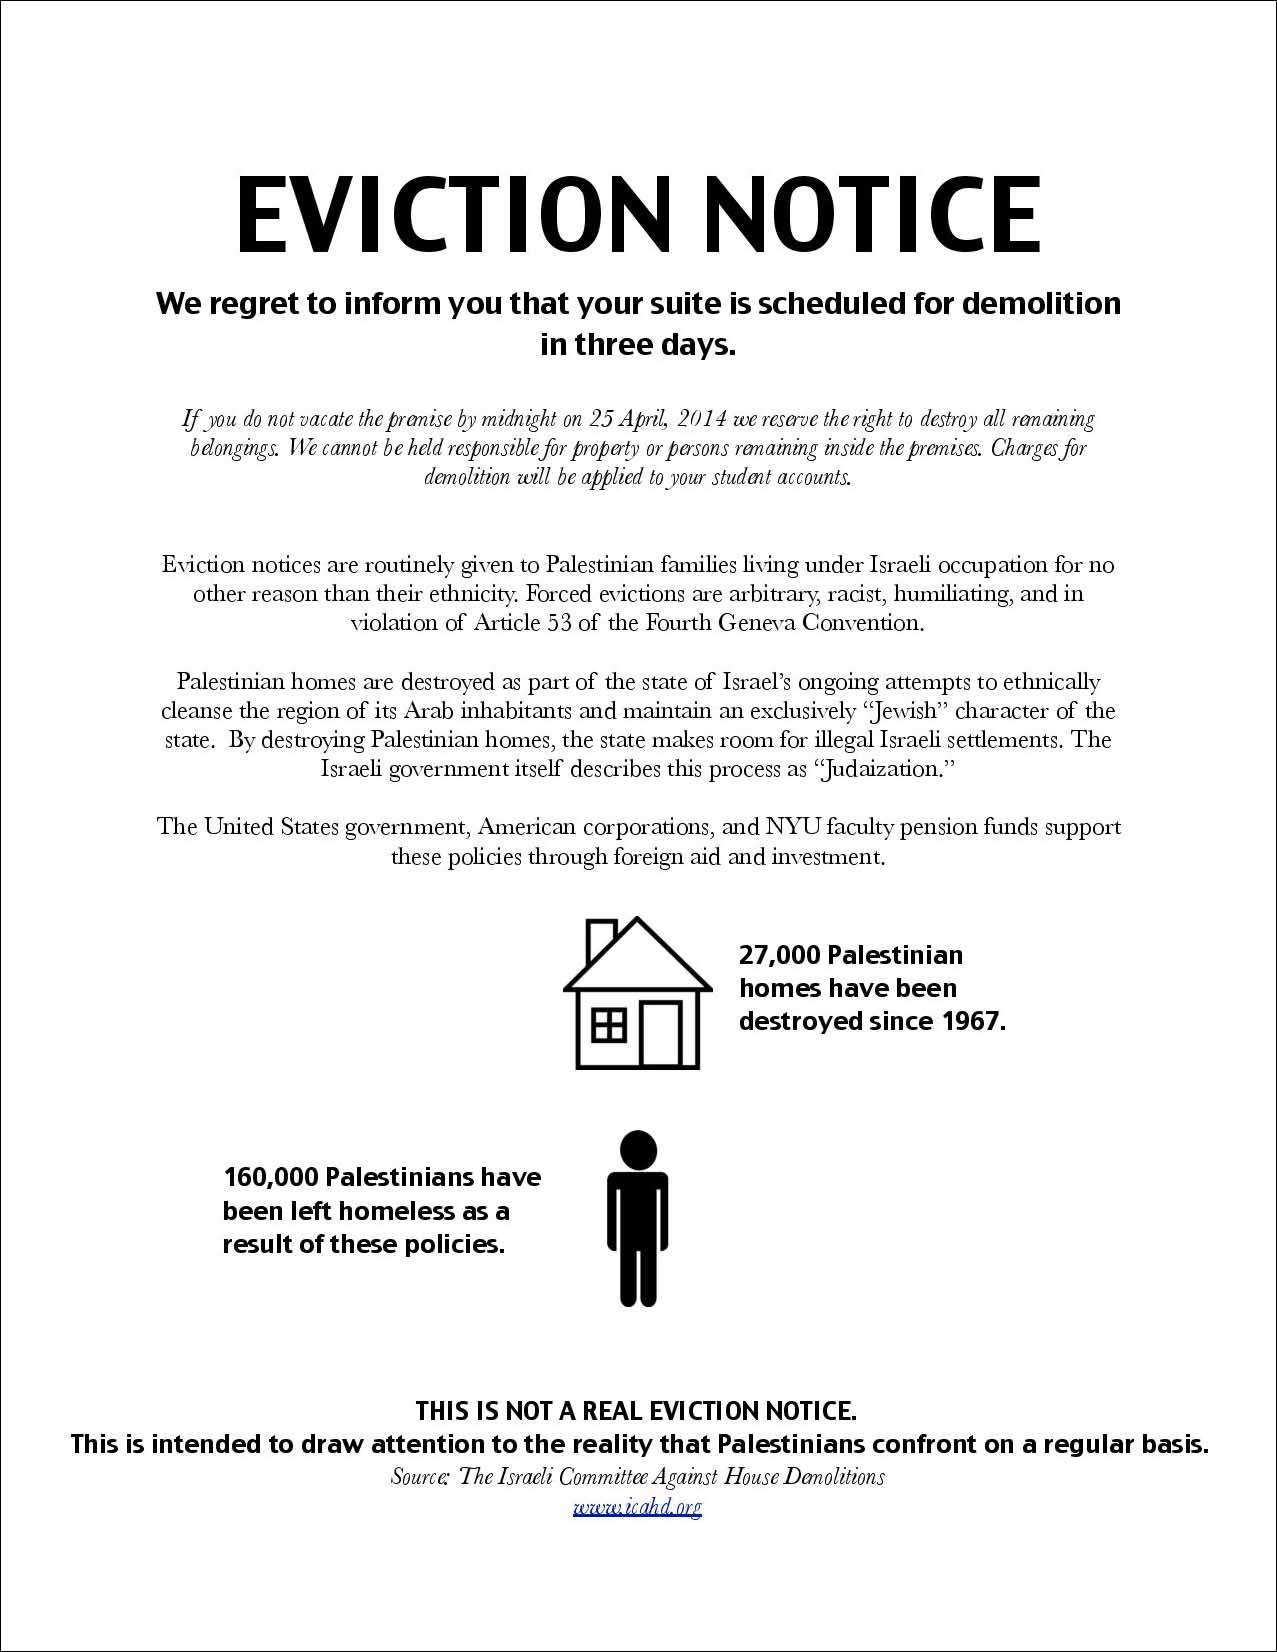 3 day eviction notice template